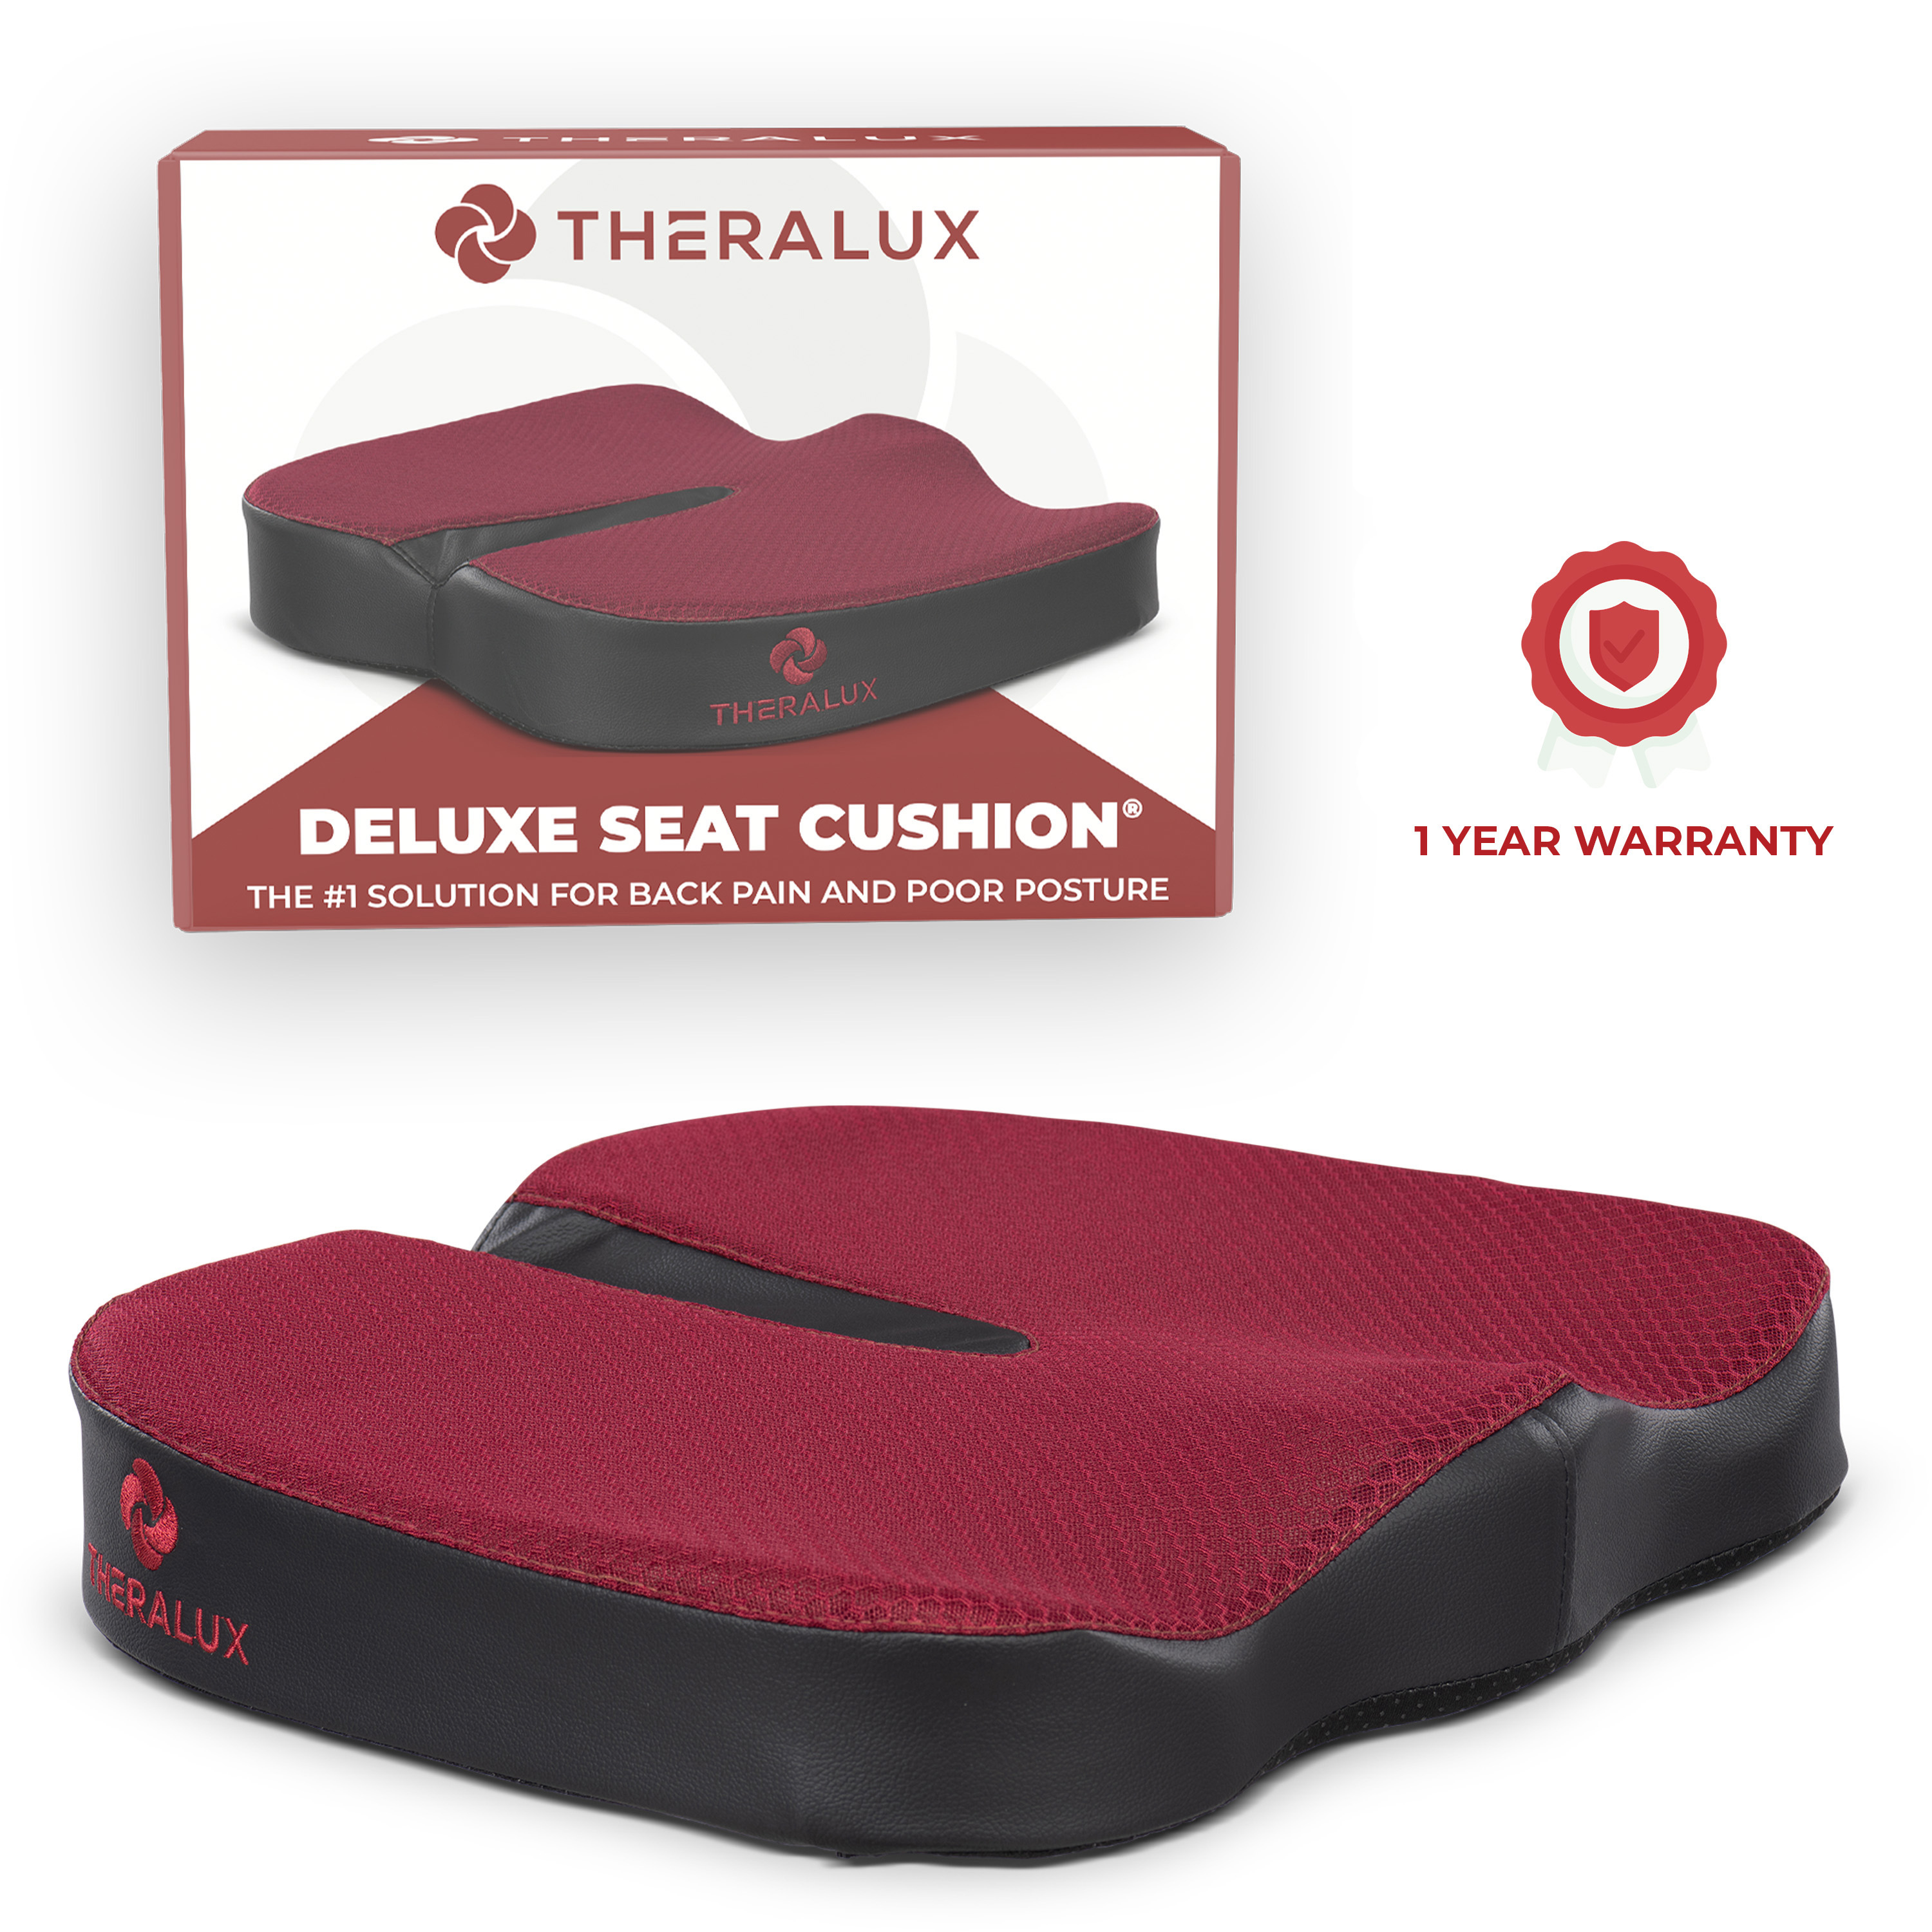 Deluxe Seat Cushion® – THERALUX